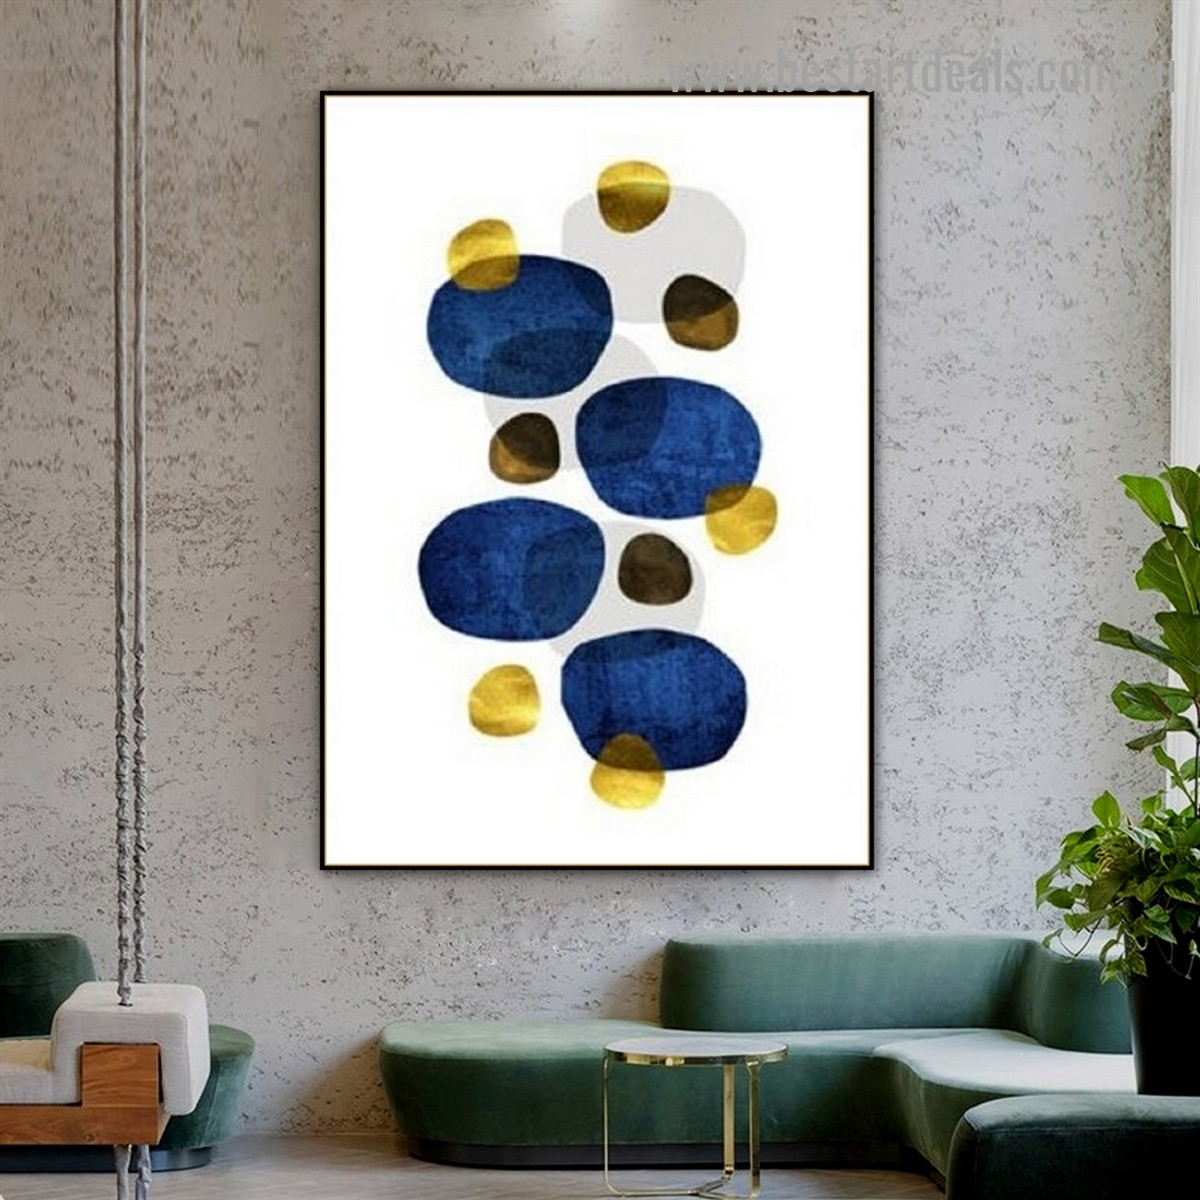 Multicolor Circular Blemish Abstract Scandinavian Framed Portrait Photo Canvas Print for Room Wall Ornament